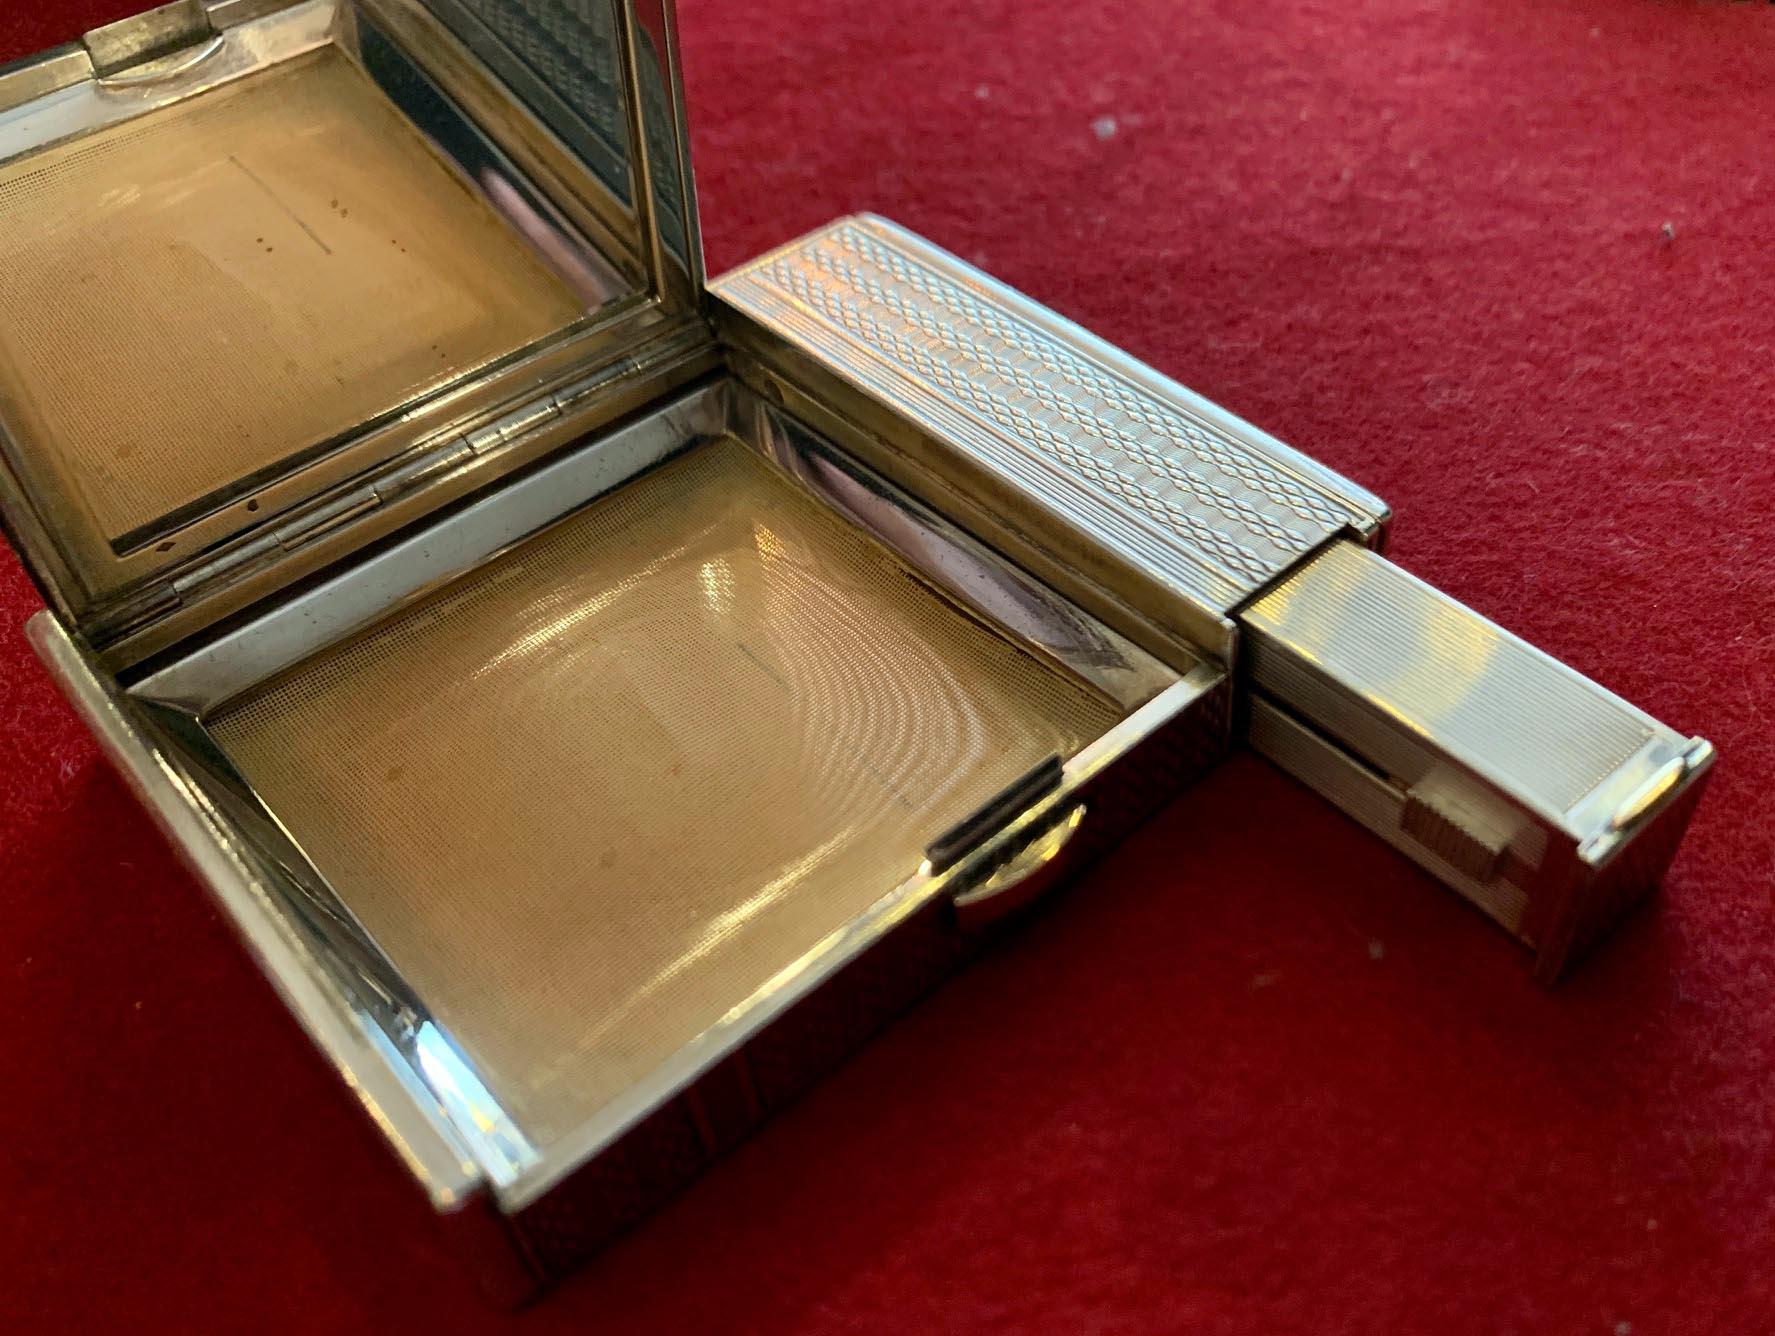 Hermès French Art Deco Silver and 18-Karat Gold Powder Box with Lipstick For Sale 3